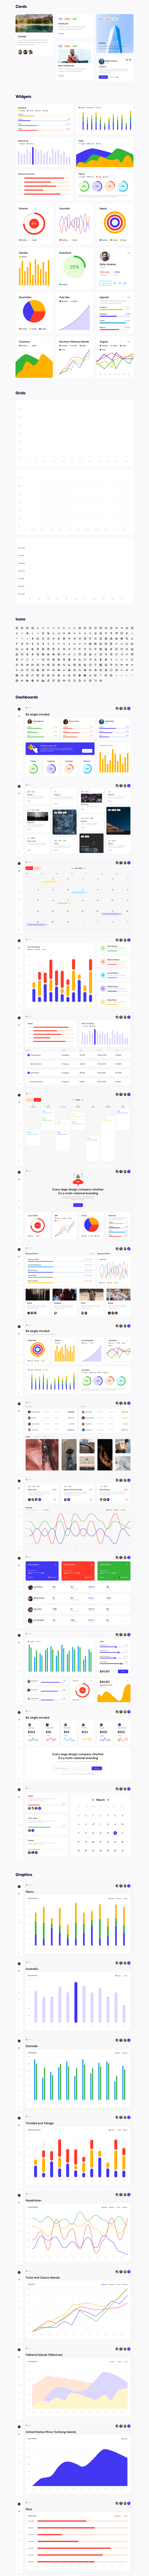 Open Source Dashboards UI Kit - Dashboards UI Kit is a set of ready-to-use templates and clean basic elements. Use it to add some statistics and key business data. Explore the pack to find colorful widgets and stylish vector elements. UI Kit is 100% customizable and easy to edit. Compatible with Sketch & Figma.